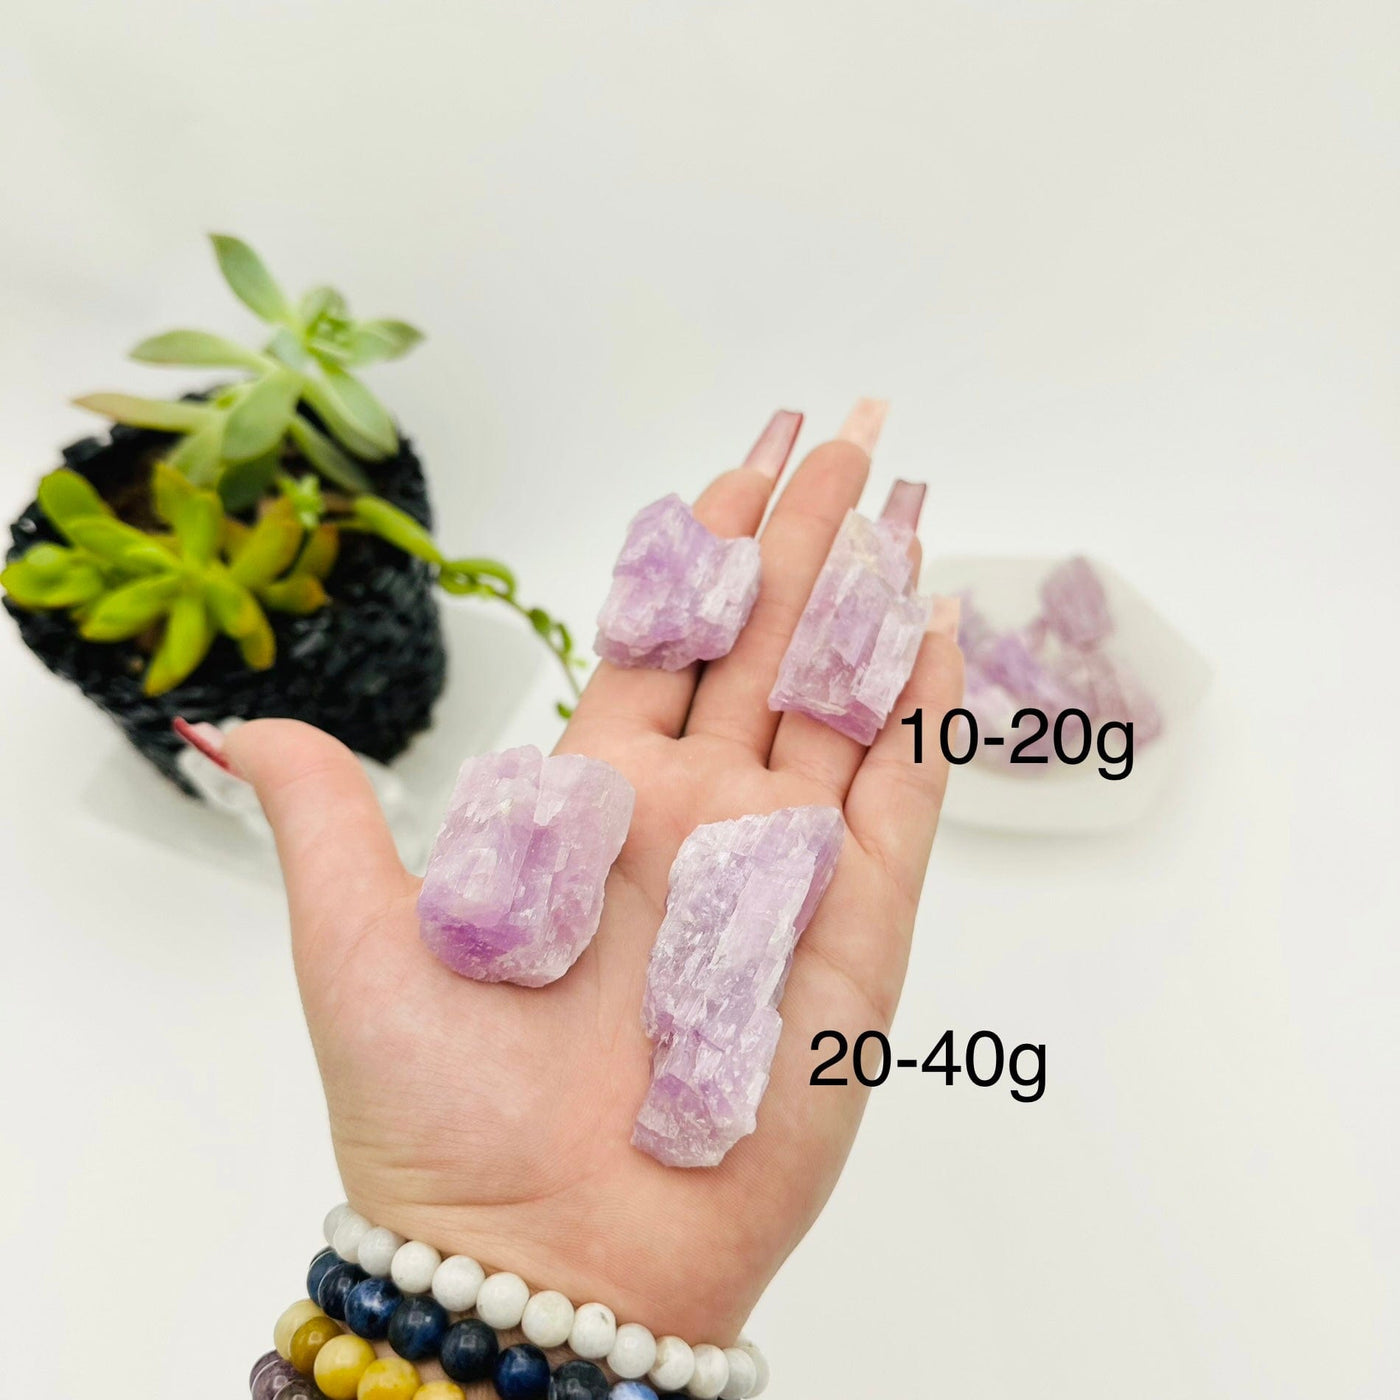 RAW KUNZITE - BY WEIGHT - four rocks in hand showing size for weights 10-20g and 20-40g